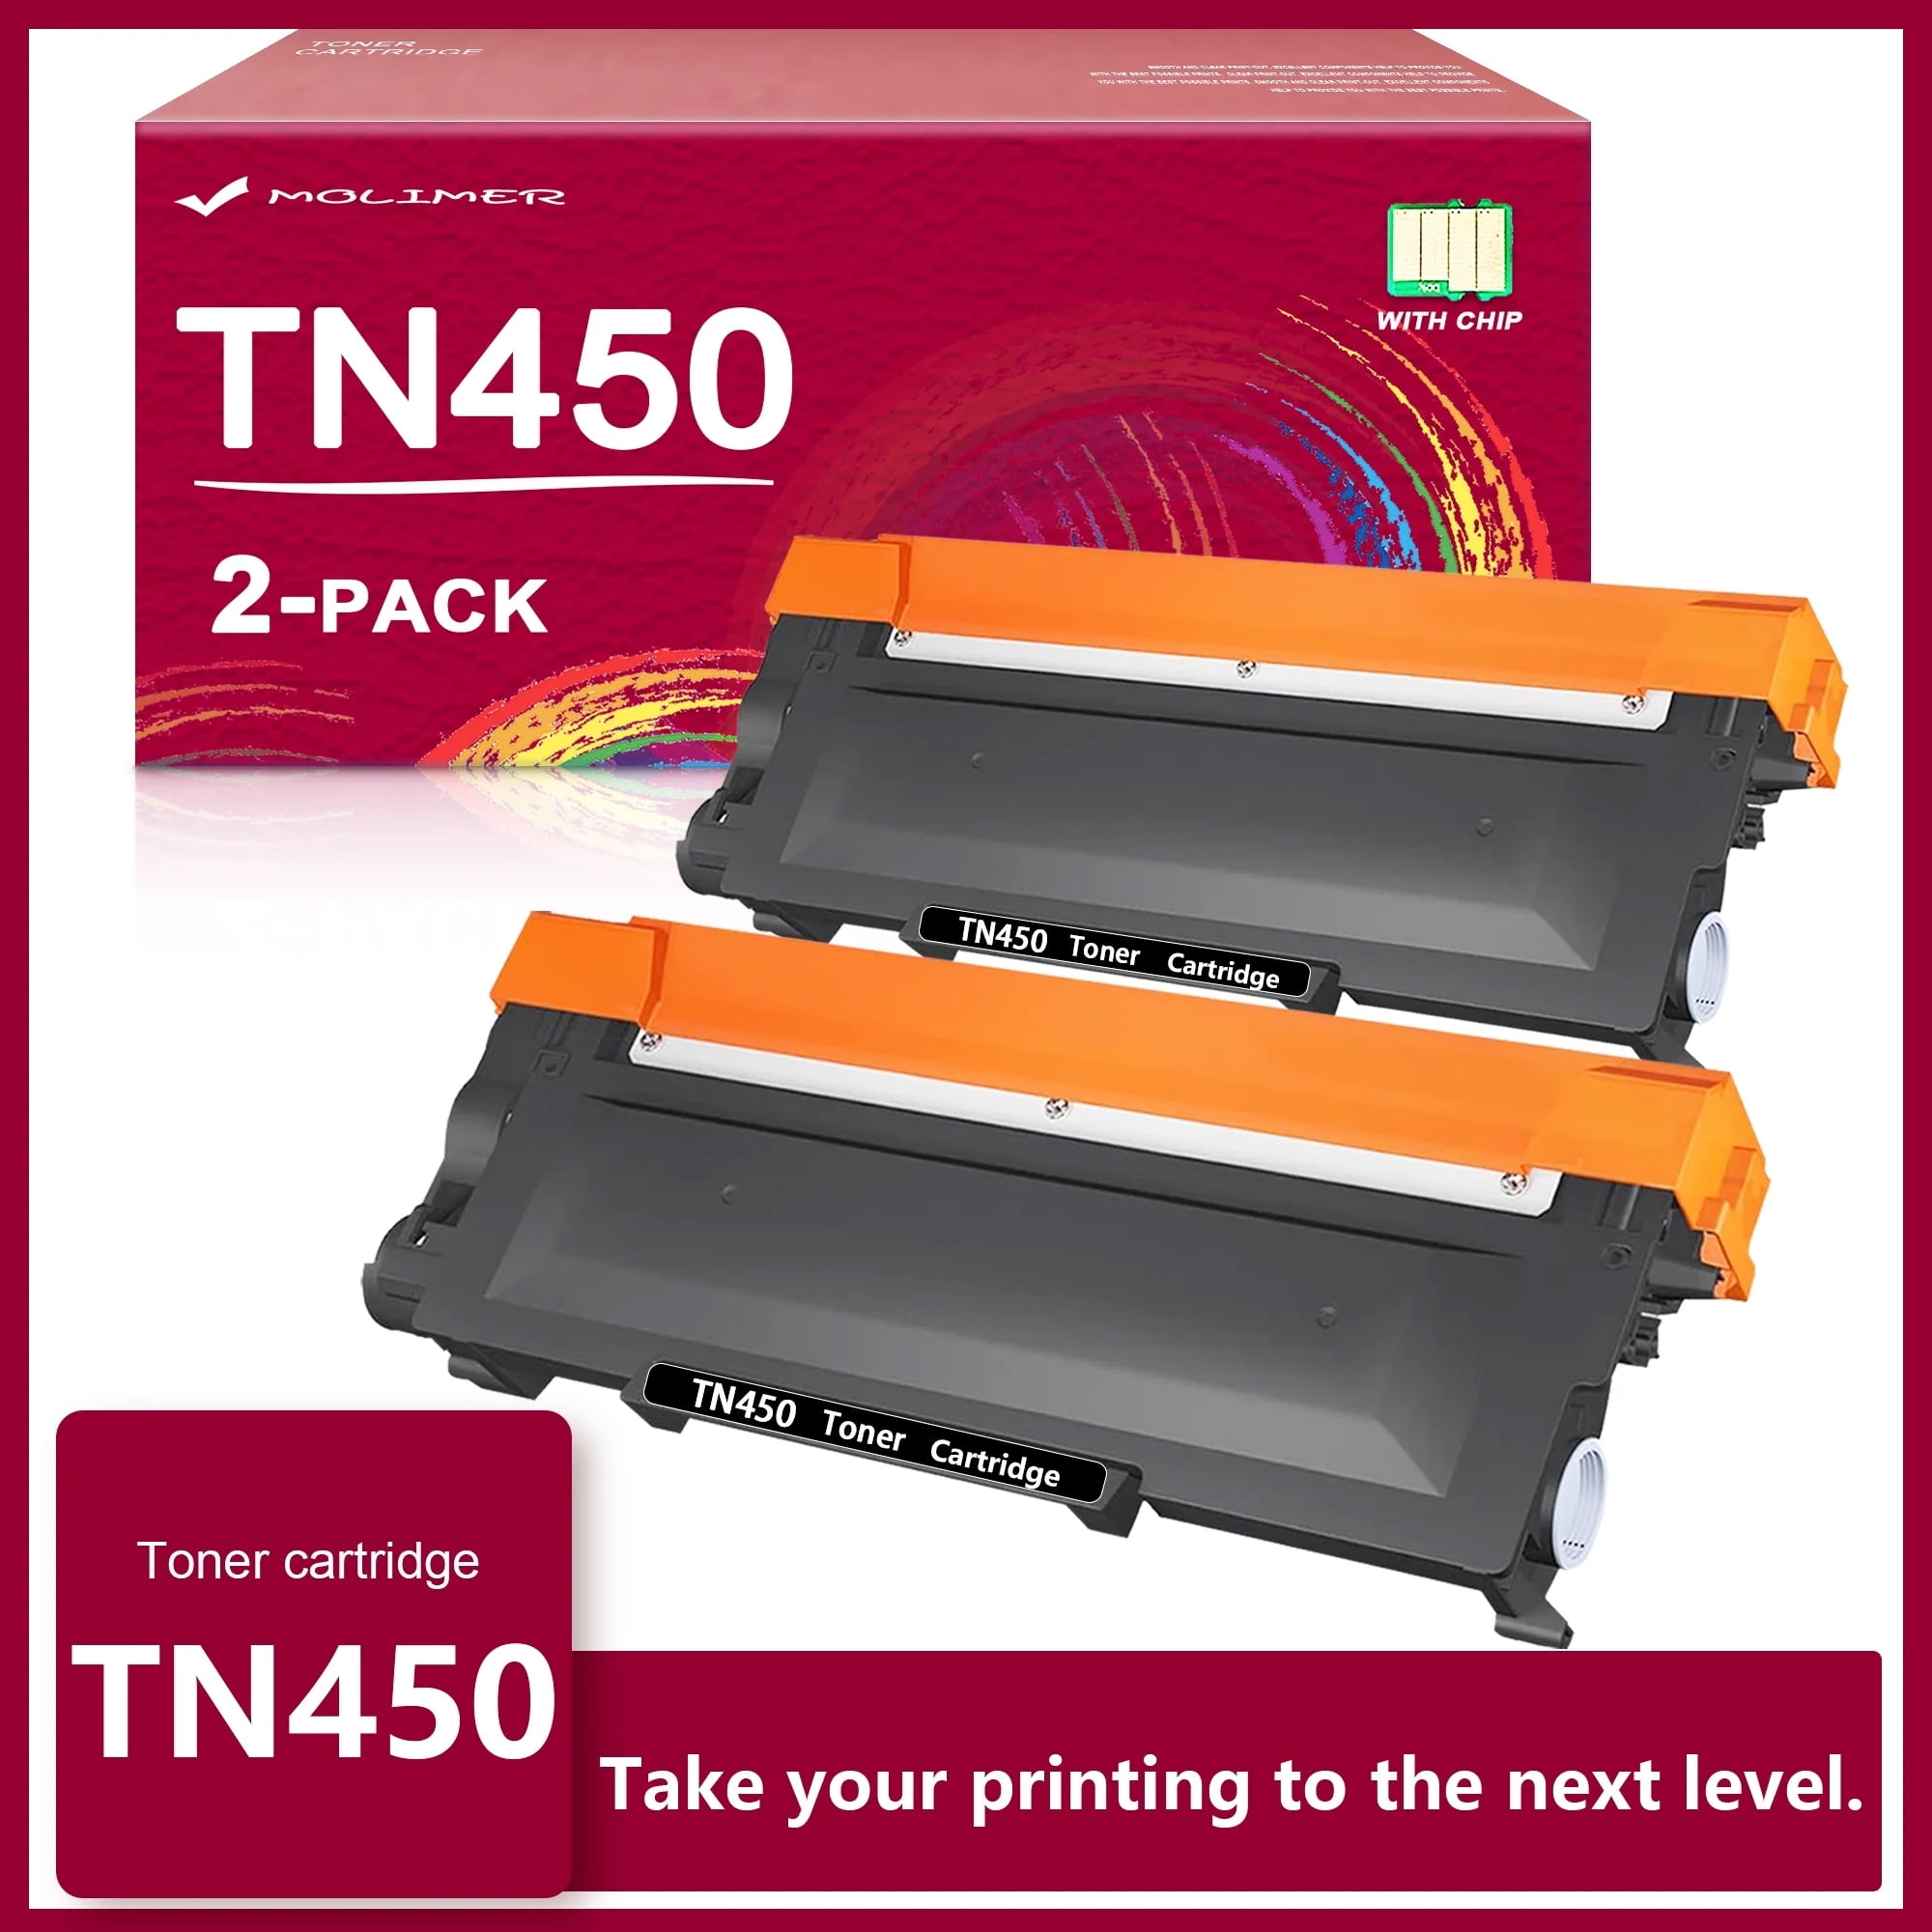 toner TN2420,toner brother TN2420,recharge cartouche brother